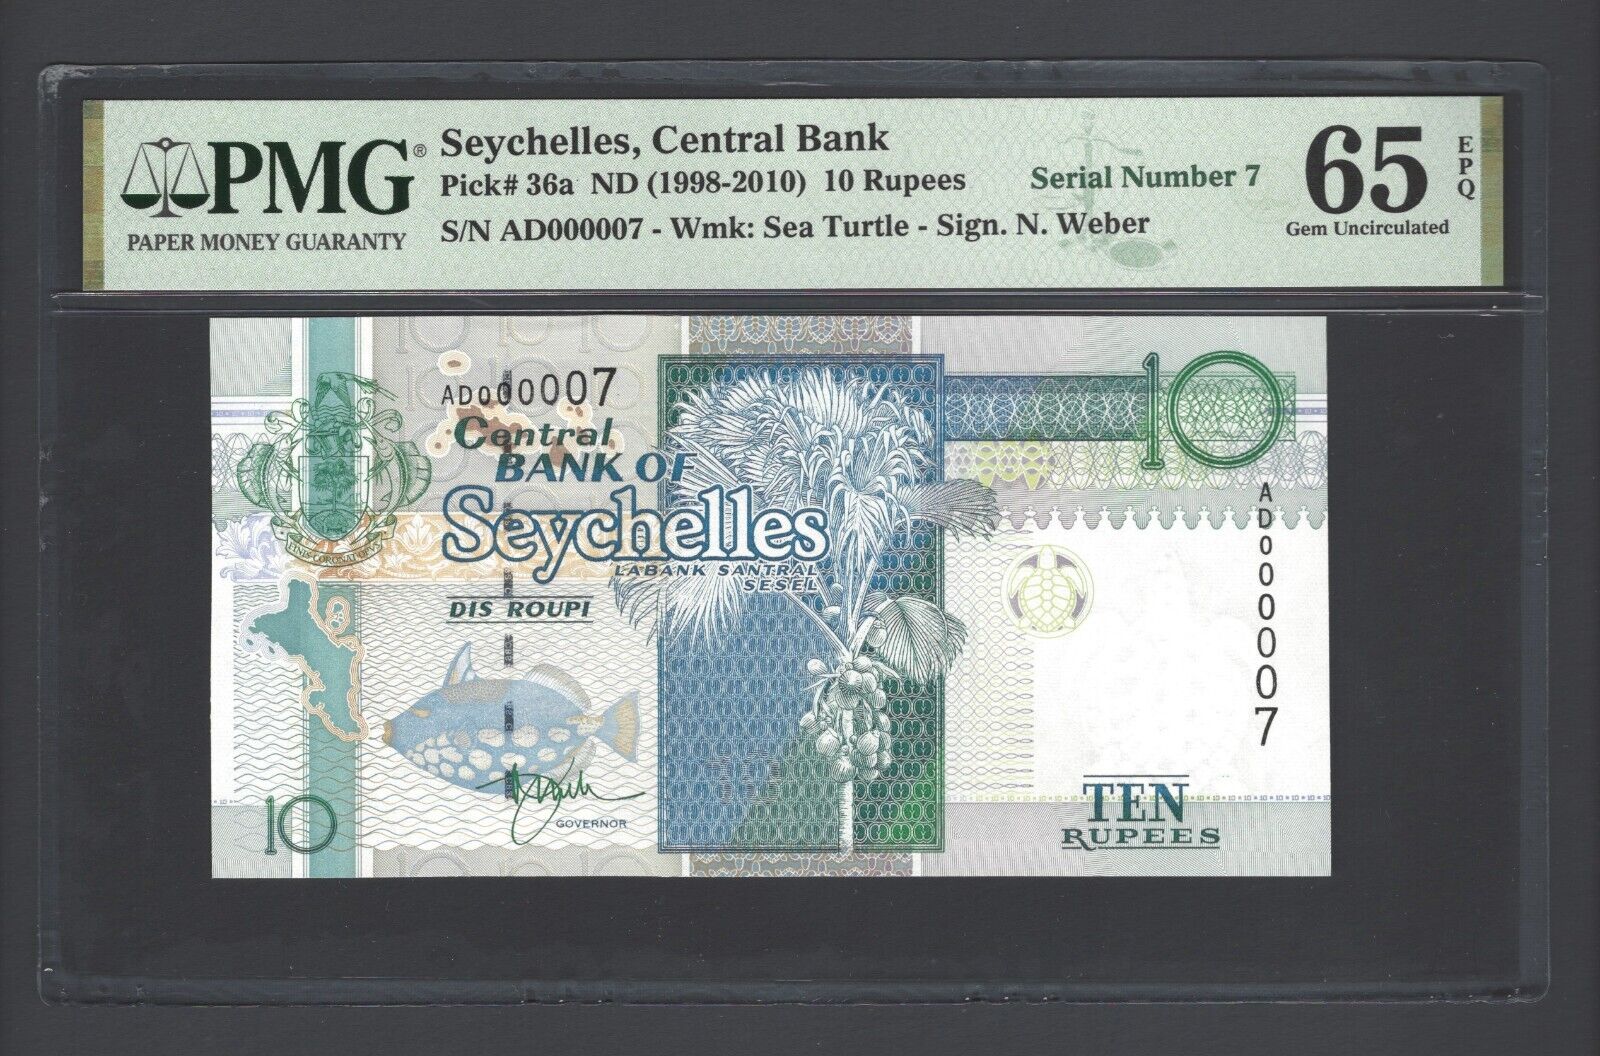 Seychelles 10 Rupees Nd(1998-2010) P36a N000007 Uncirculated Grade 65